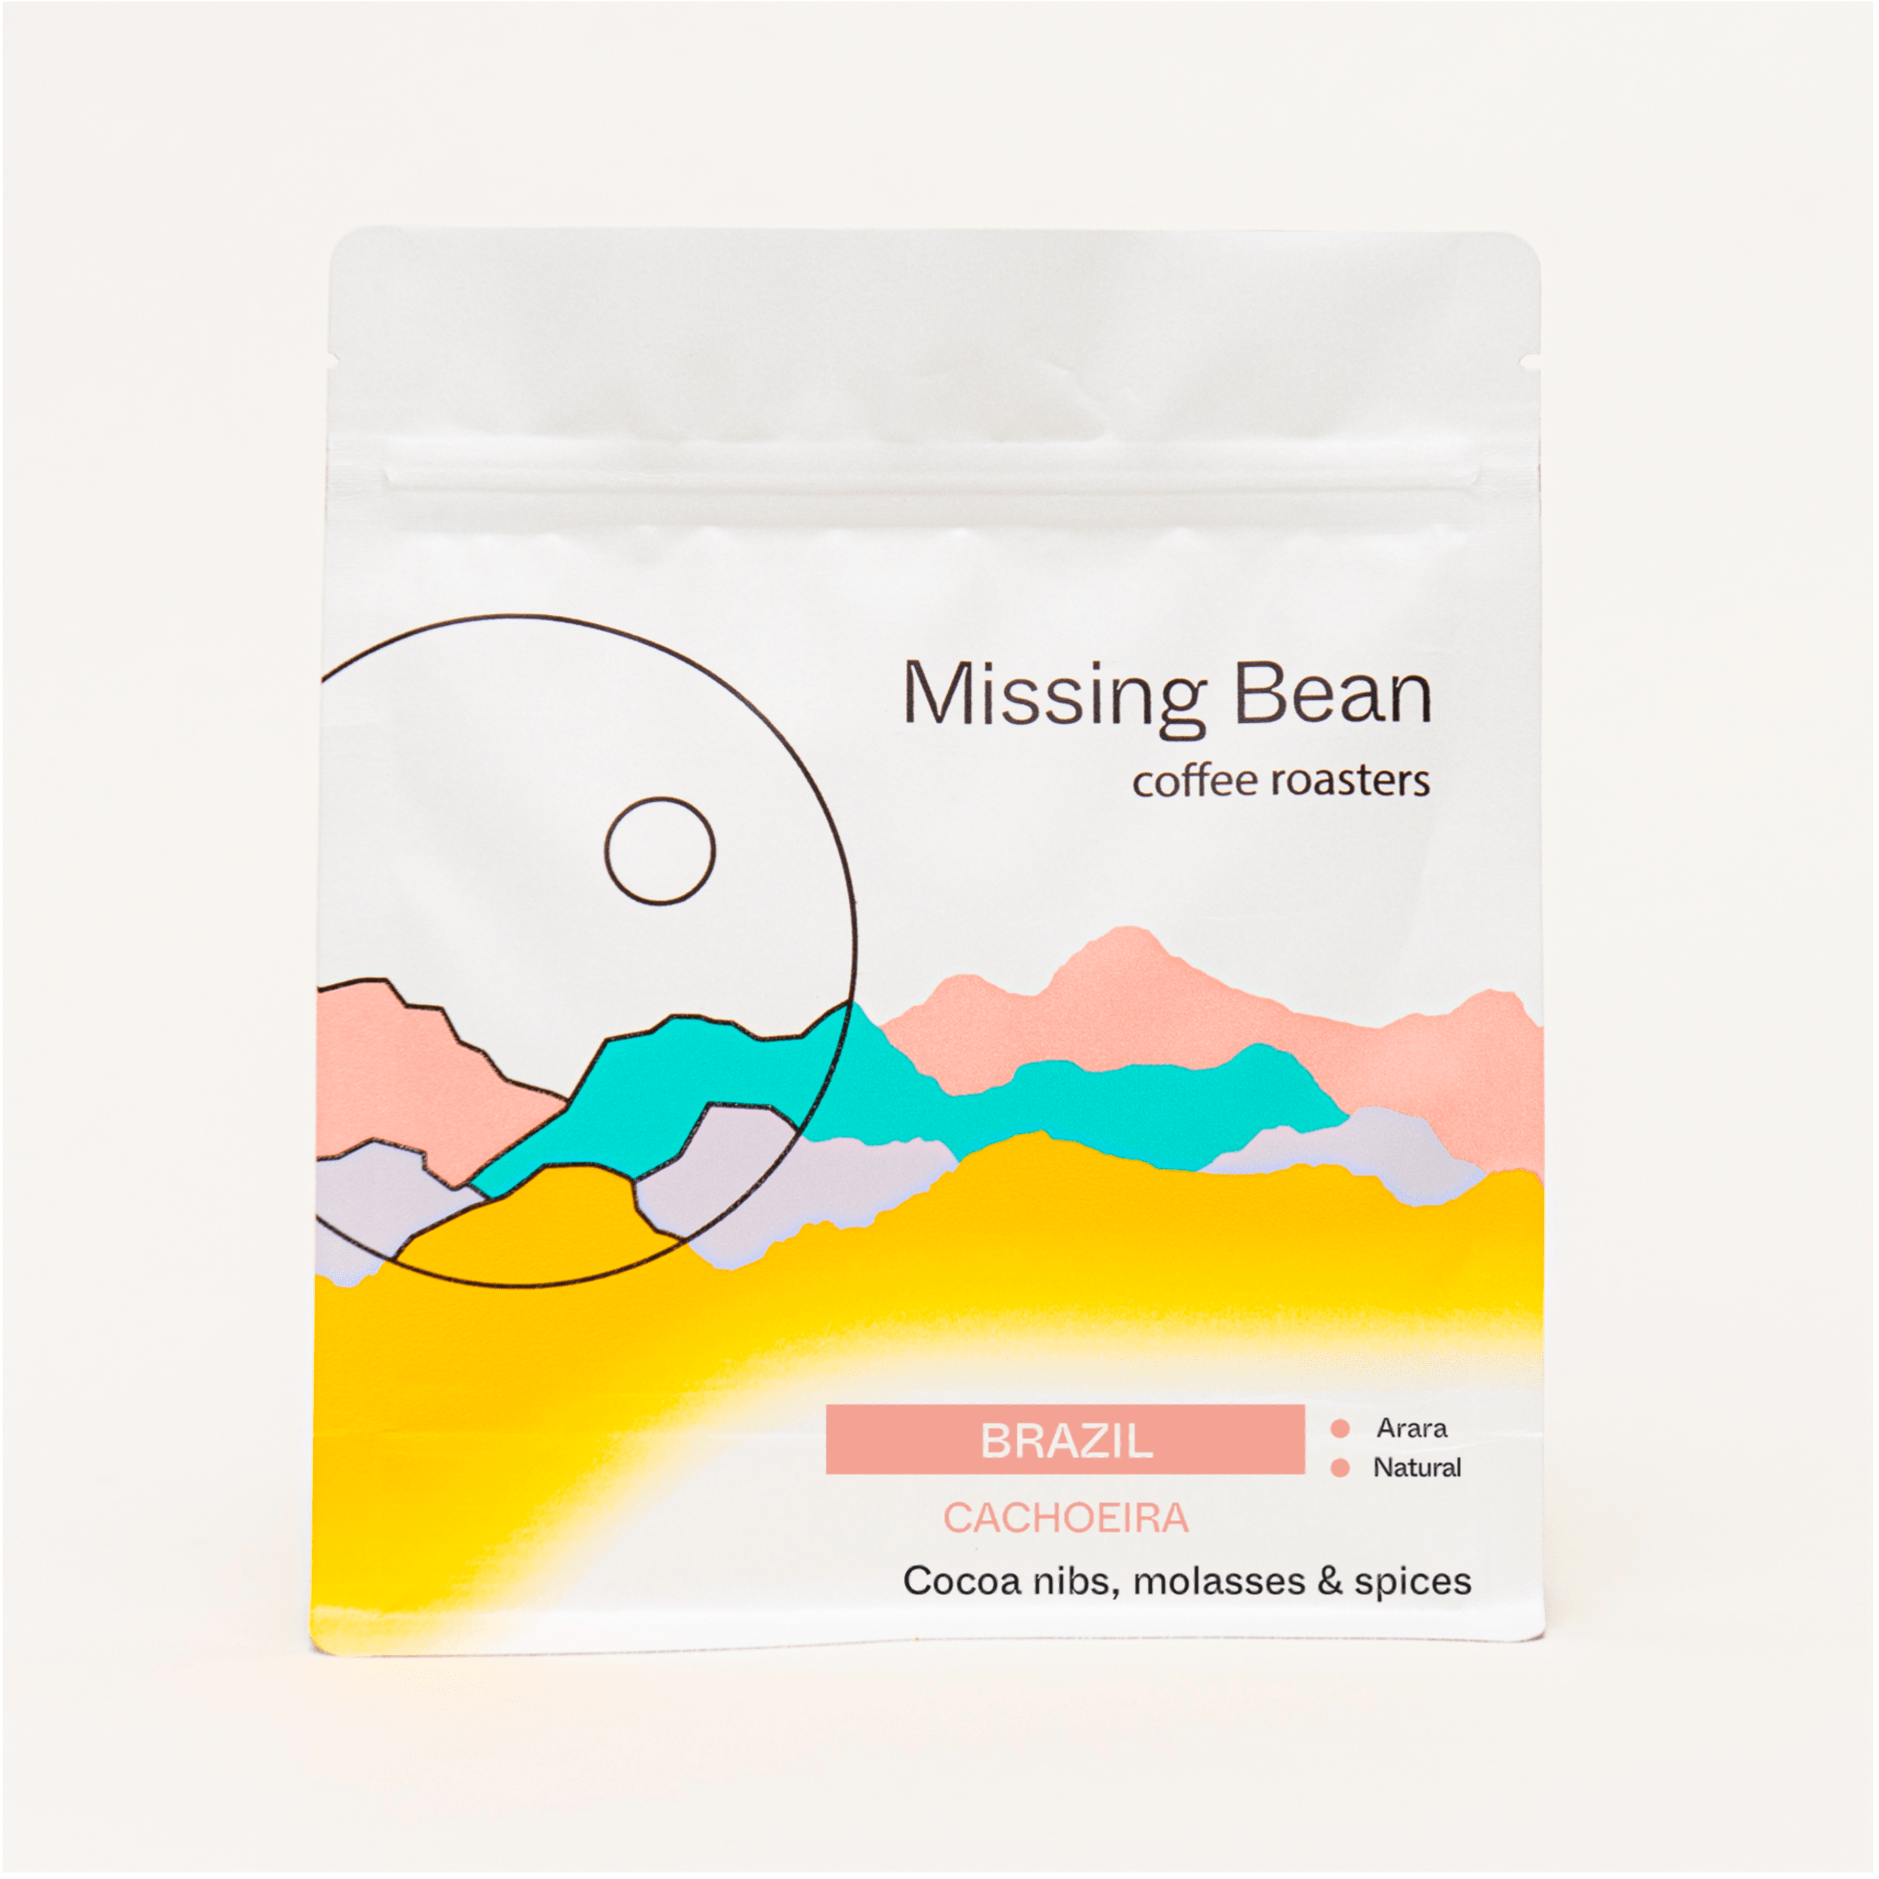 A bag of Missing bean coffee roasters Brazil - Cachoeira coffee beans